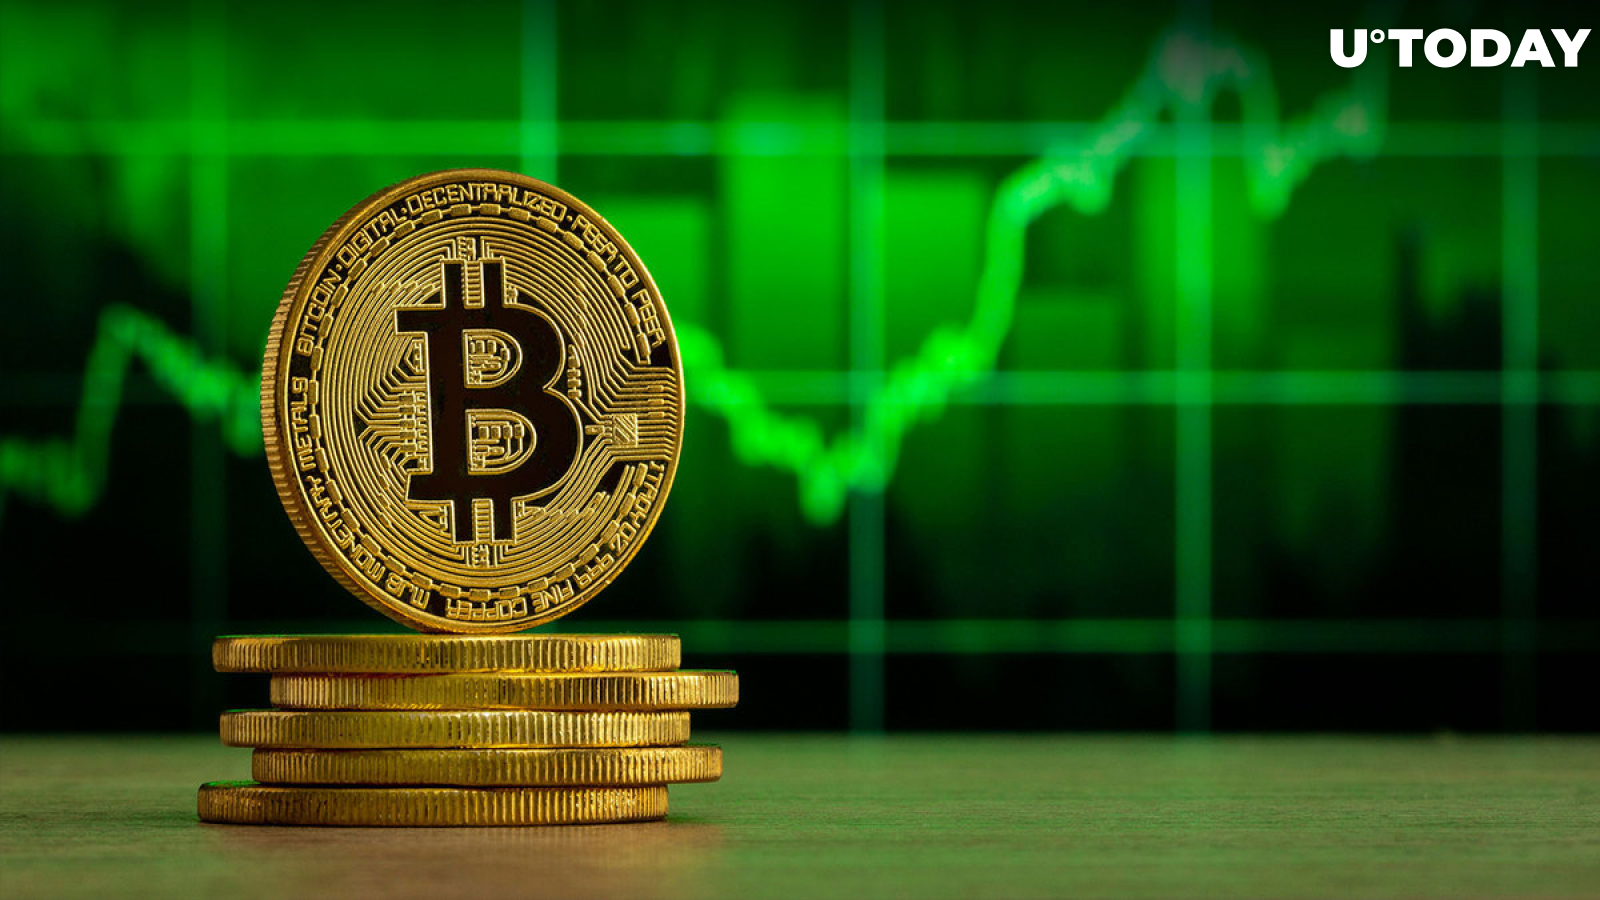 Bitcoin (BTC) up 23% as History Repeats Itself With Macro Downtrend Broken: Analyst